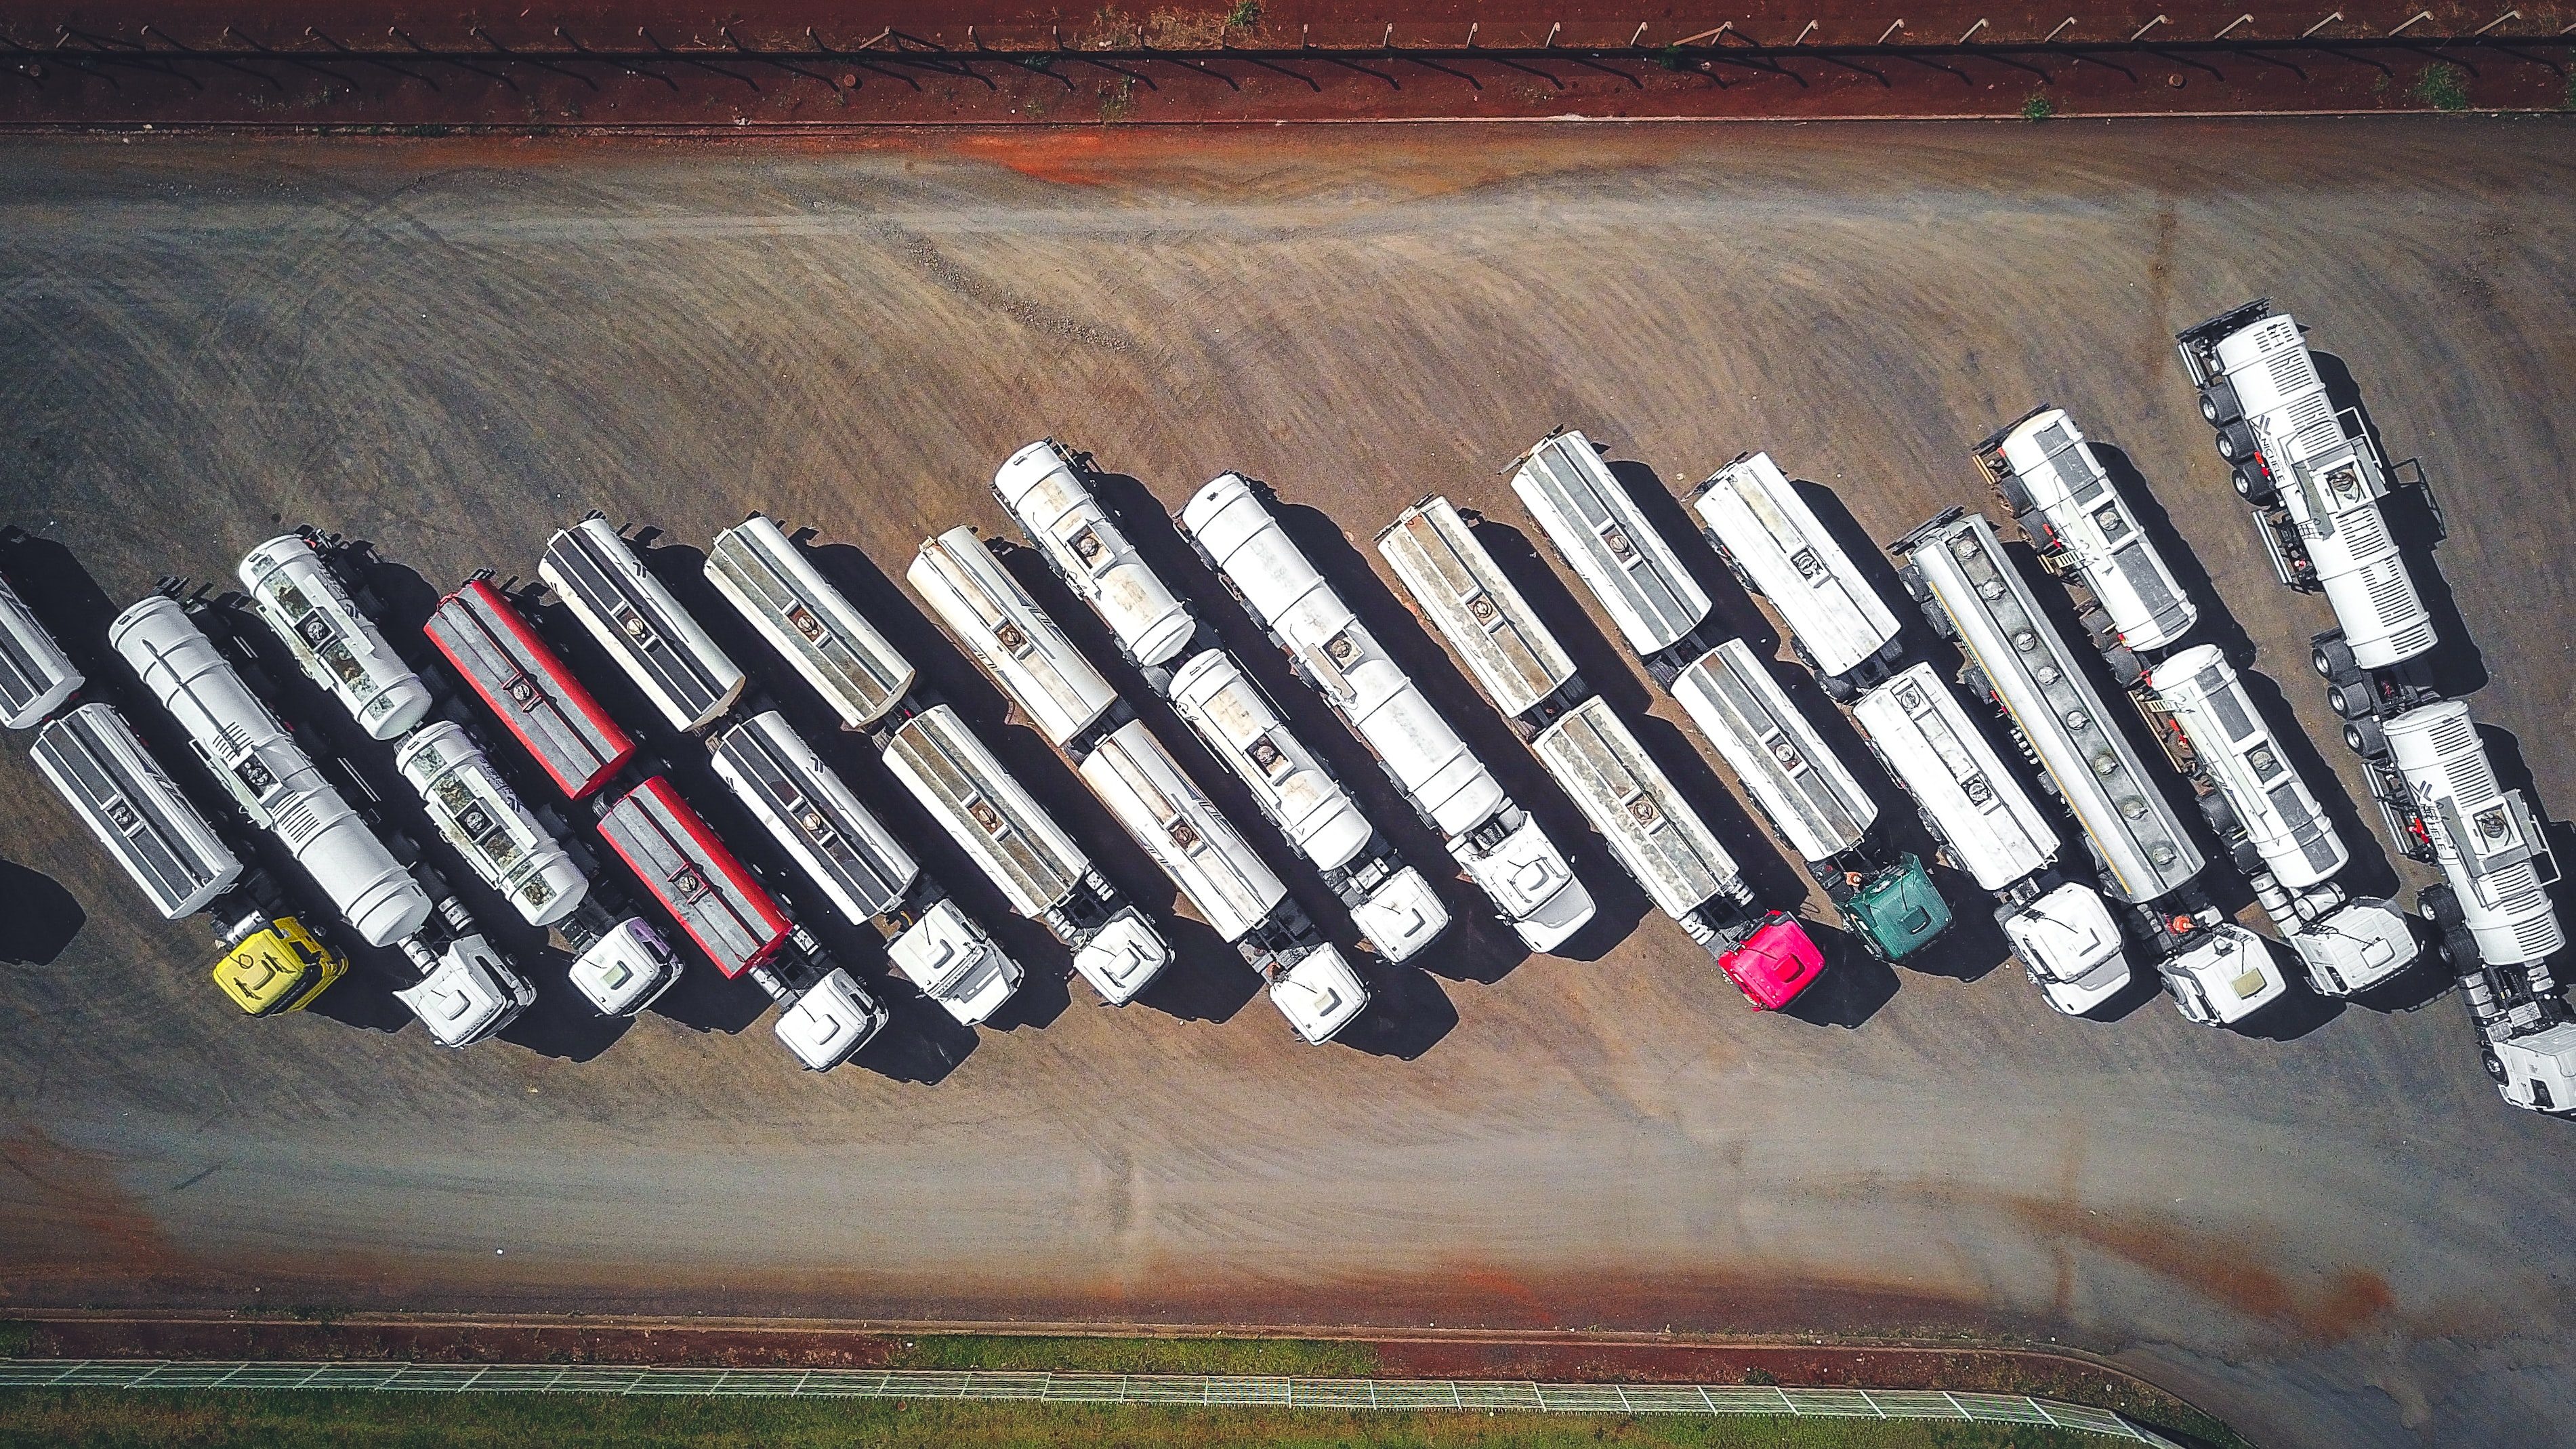 18 wheelers parked in a line